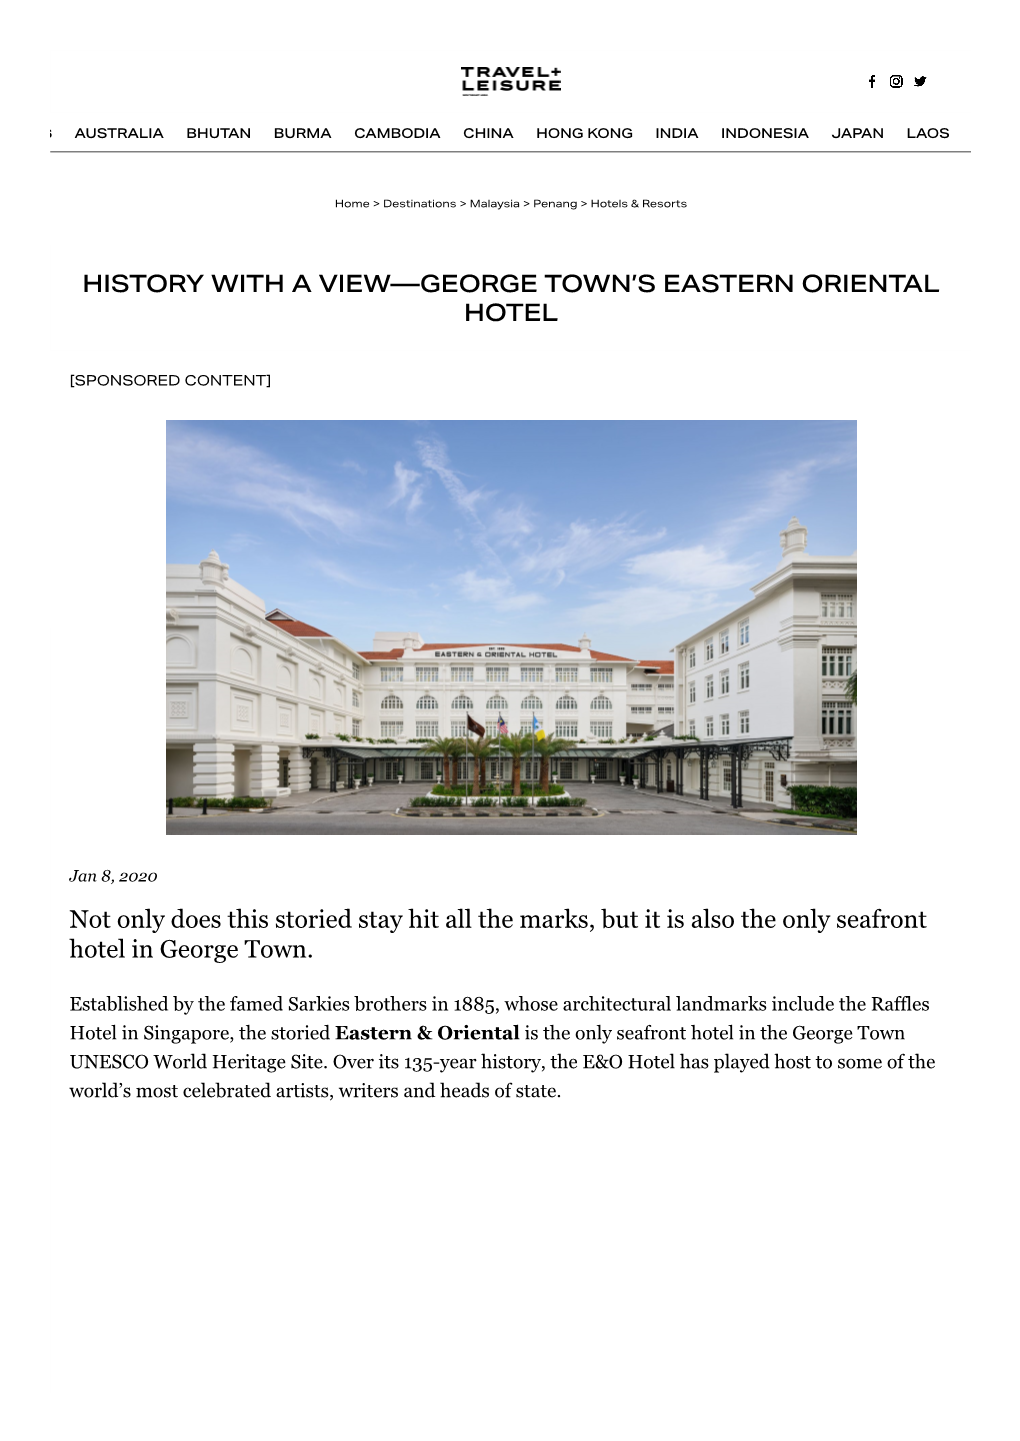 History with a View—George Town's Eastern Oriental